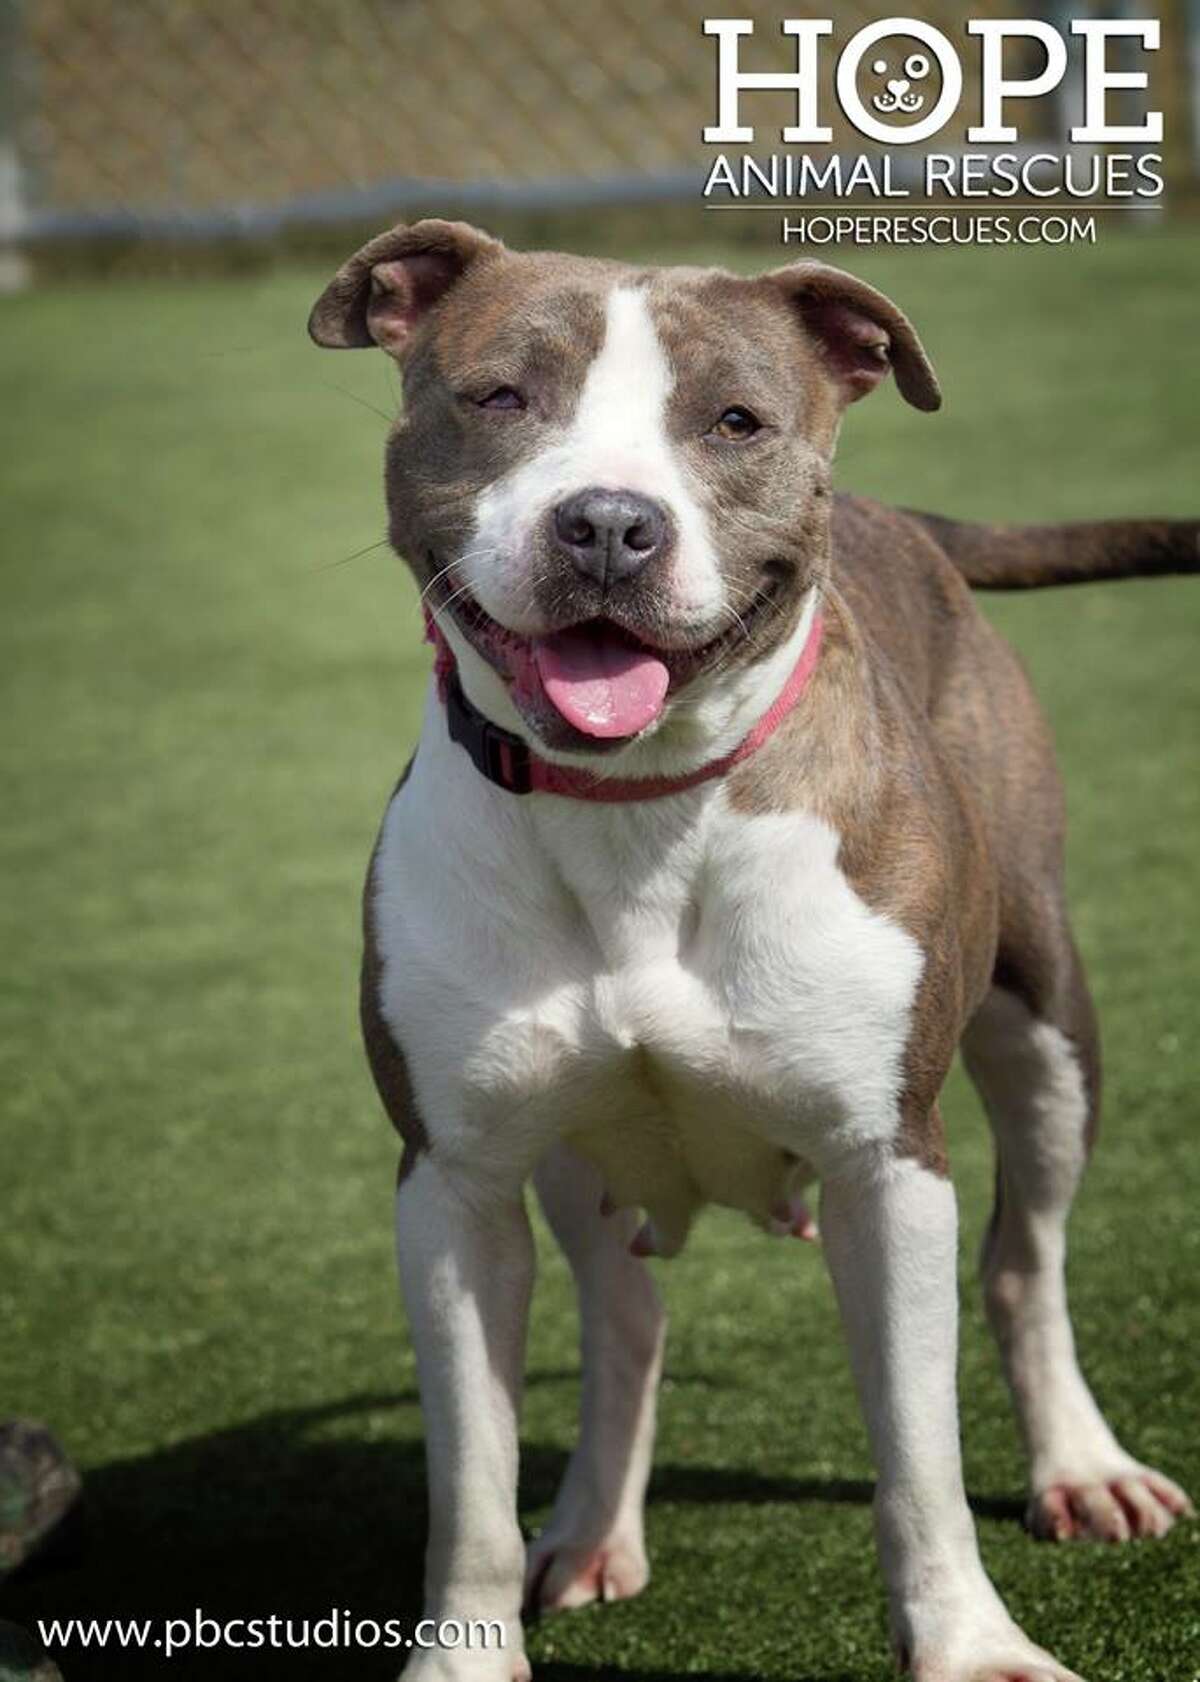 London, a 7-year-old American Staffordshire terrier, is looking for a loving home. An approved application is needed to meet Hope Rescues’ dogs and you can apply directly at www.hoperescues.org . 